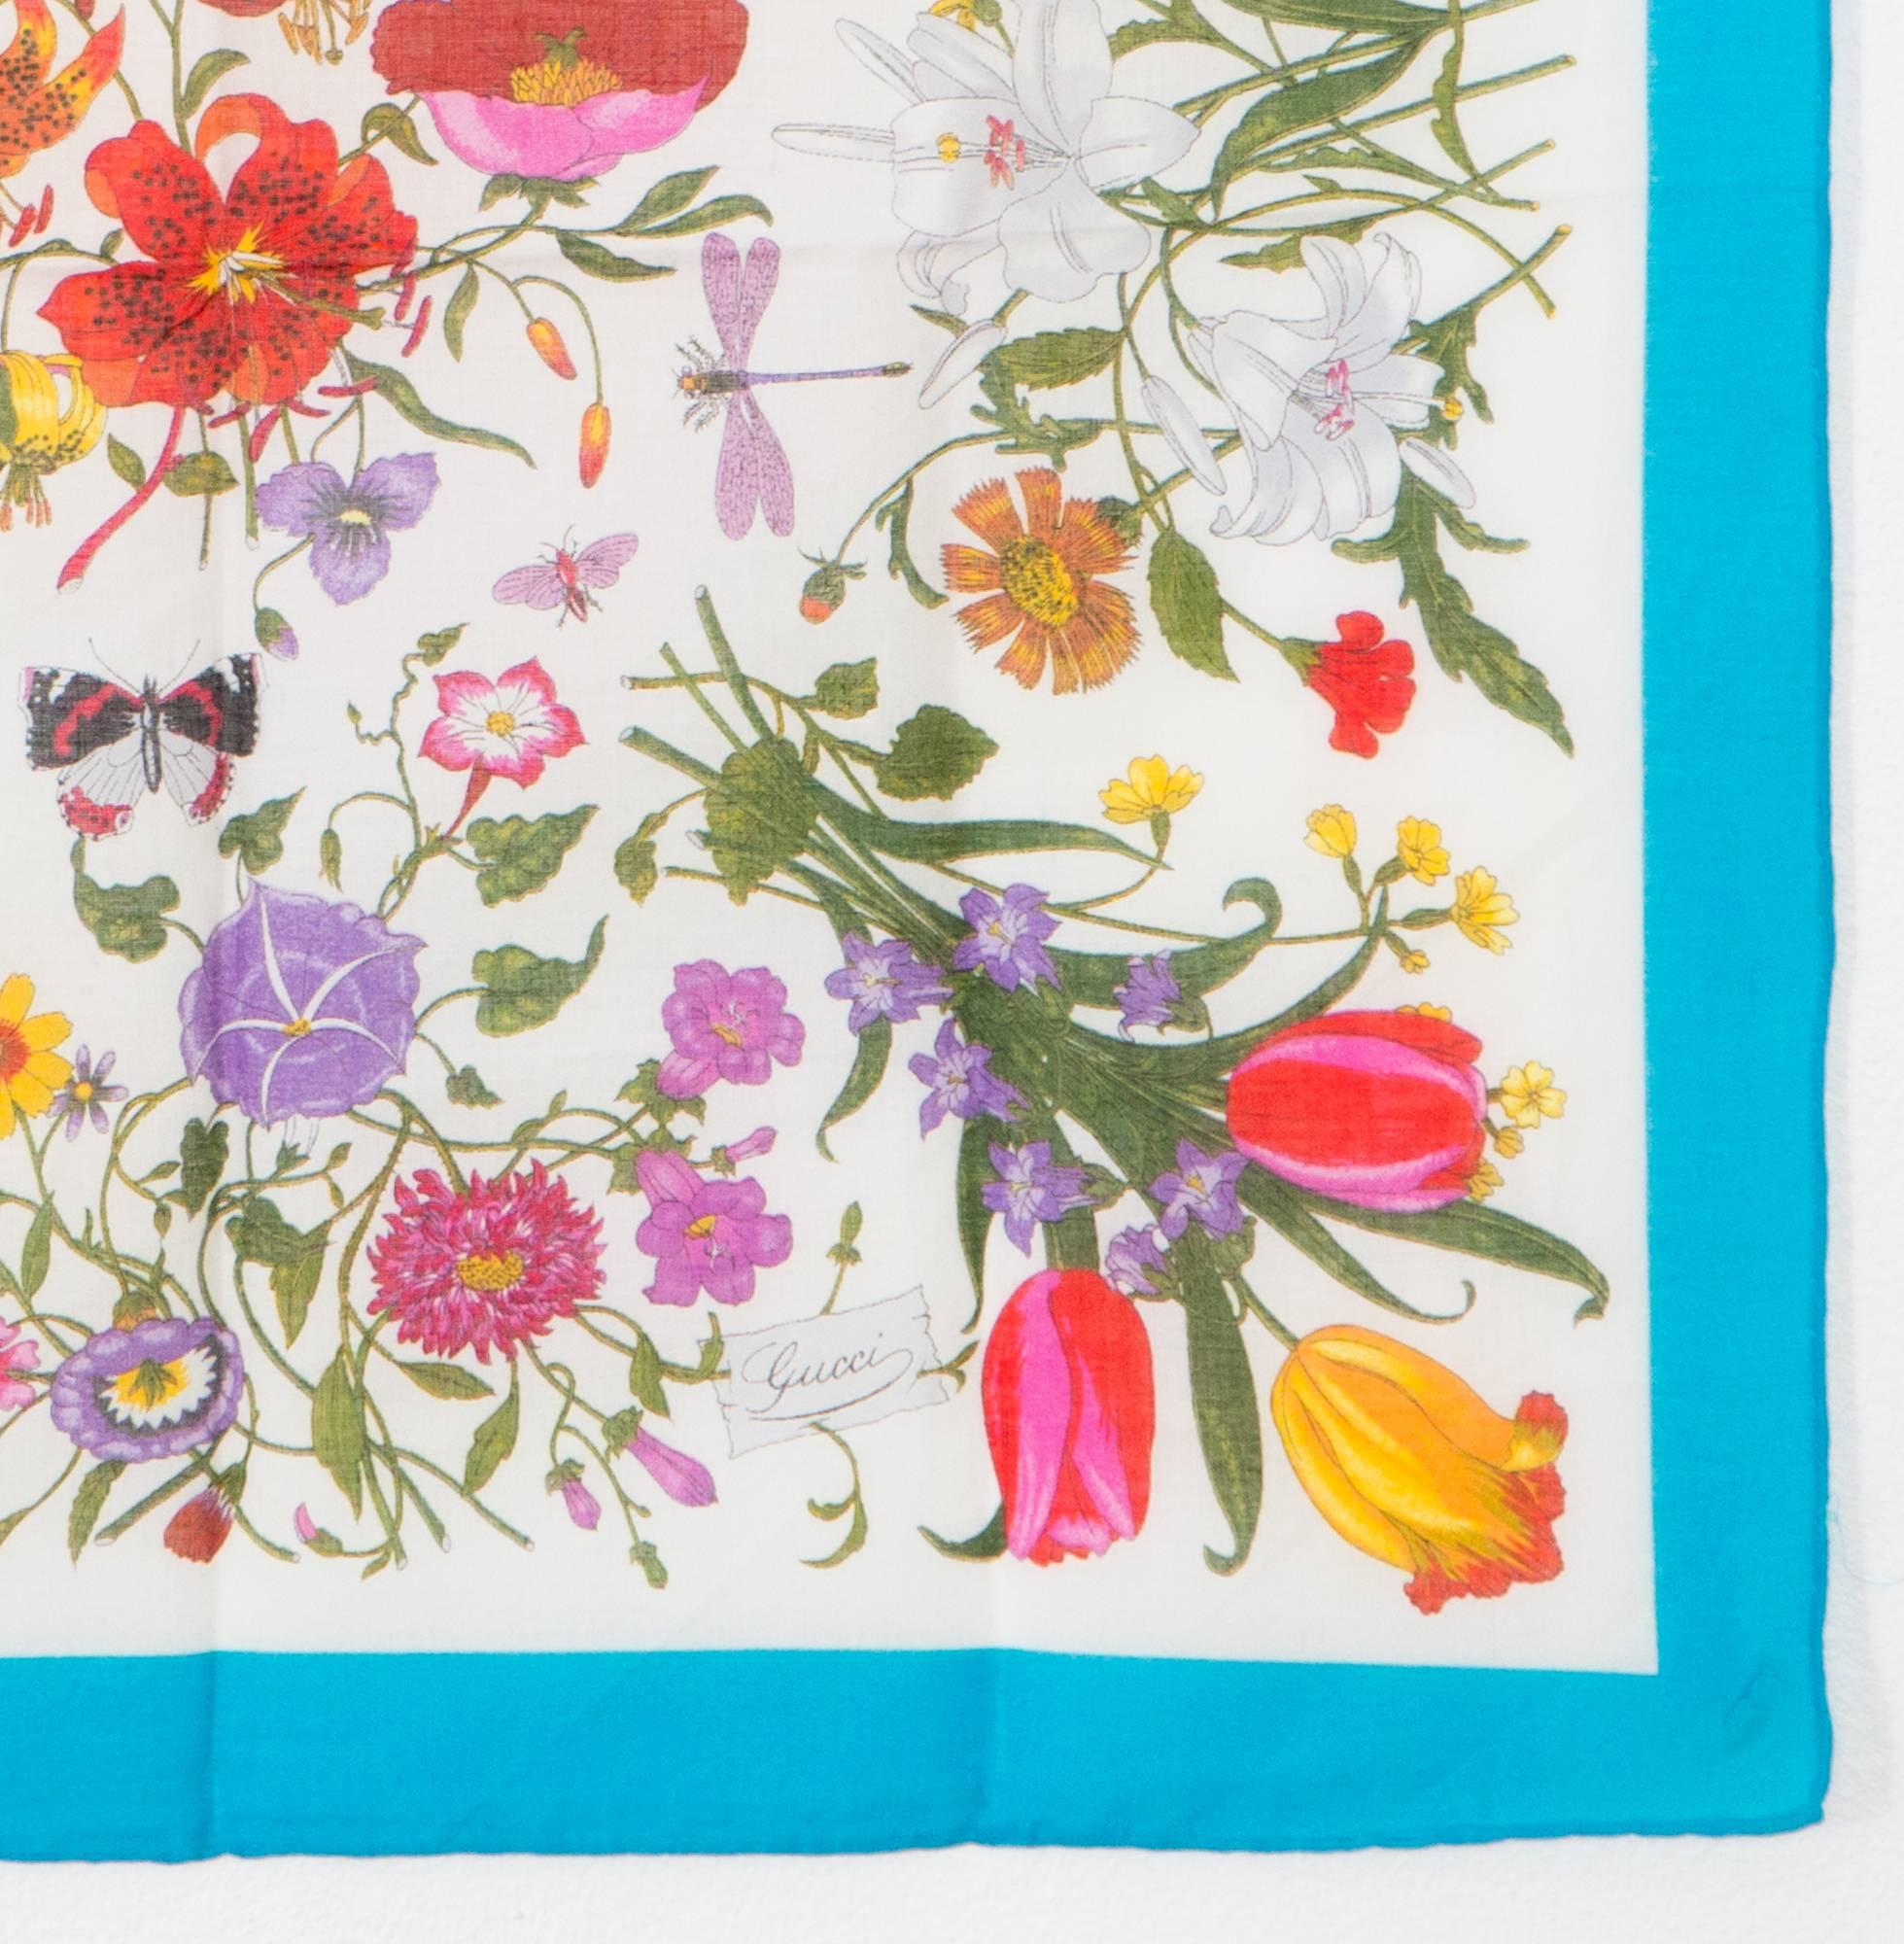 Women's or Men's Gucci Flora Printed Cotton Scarf Turquoise Border